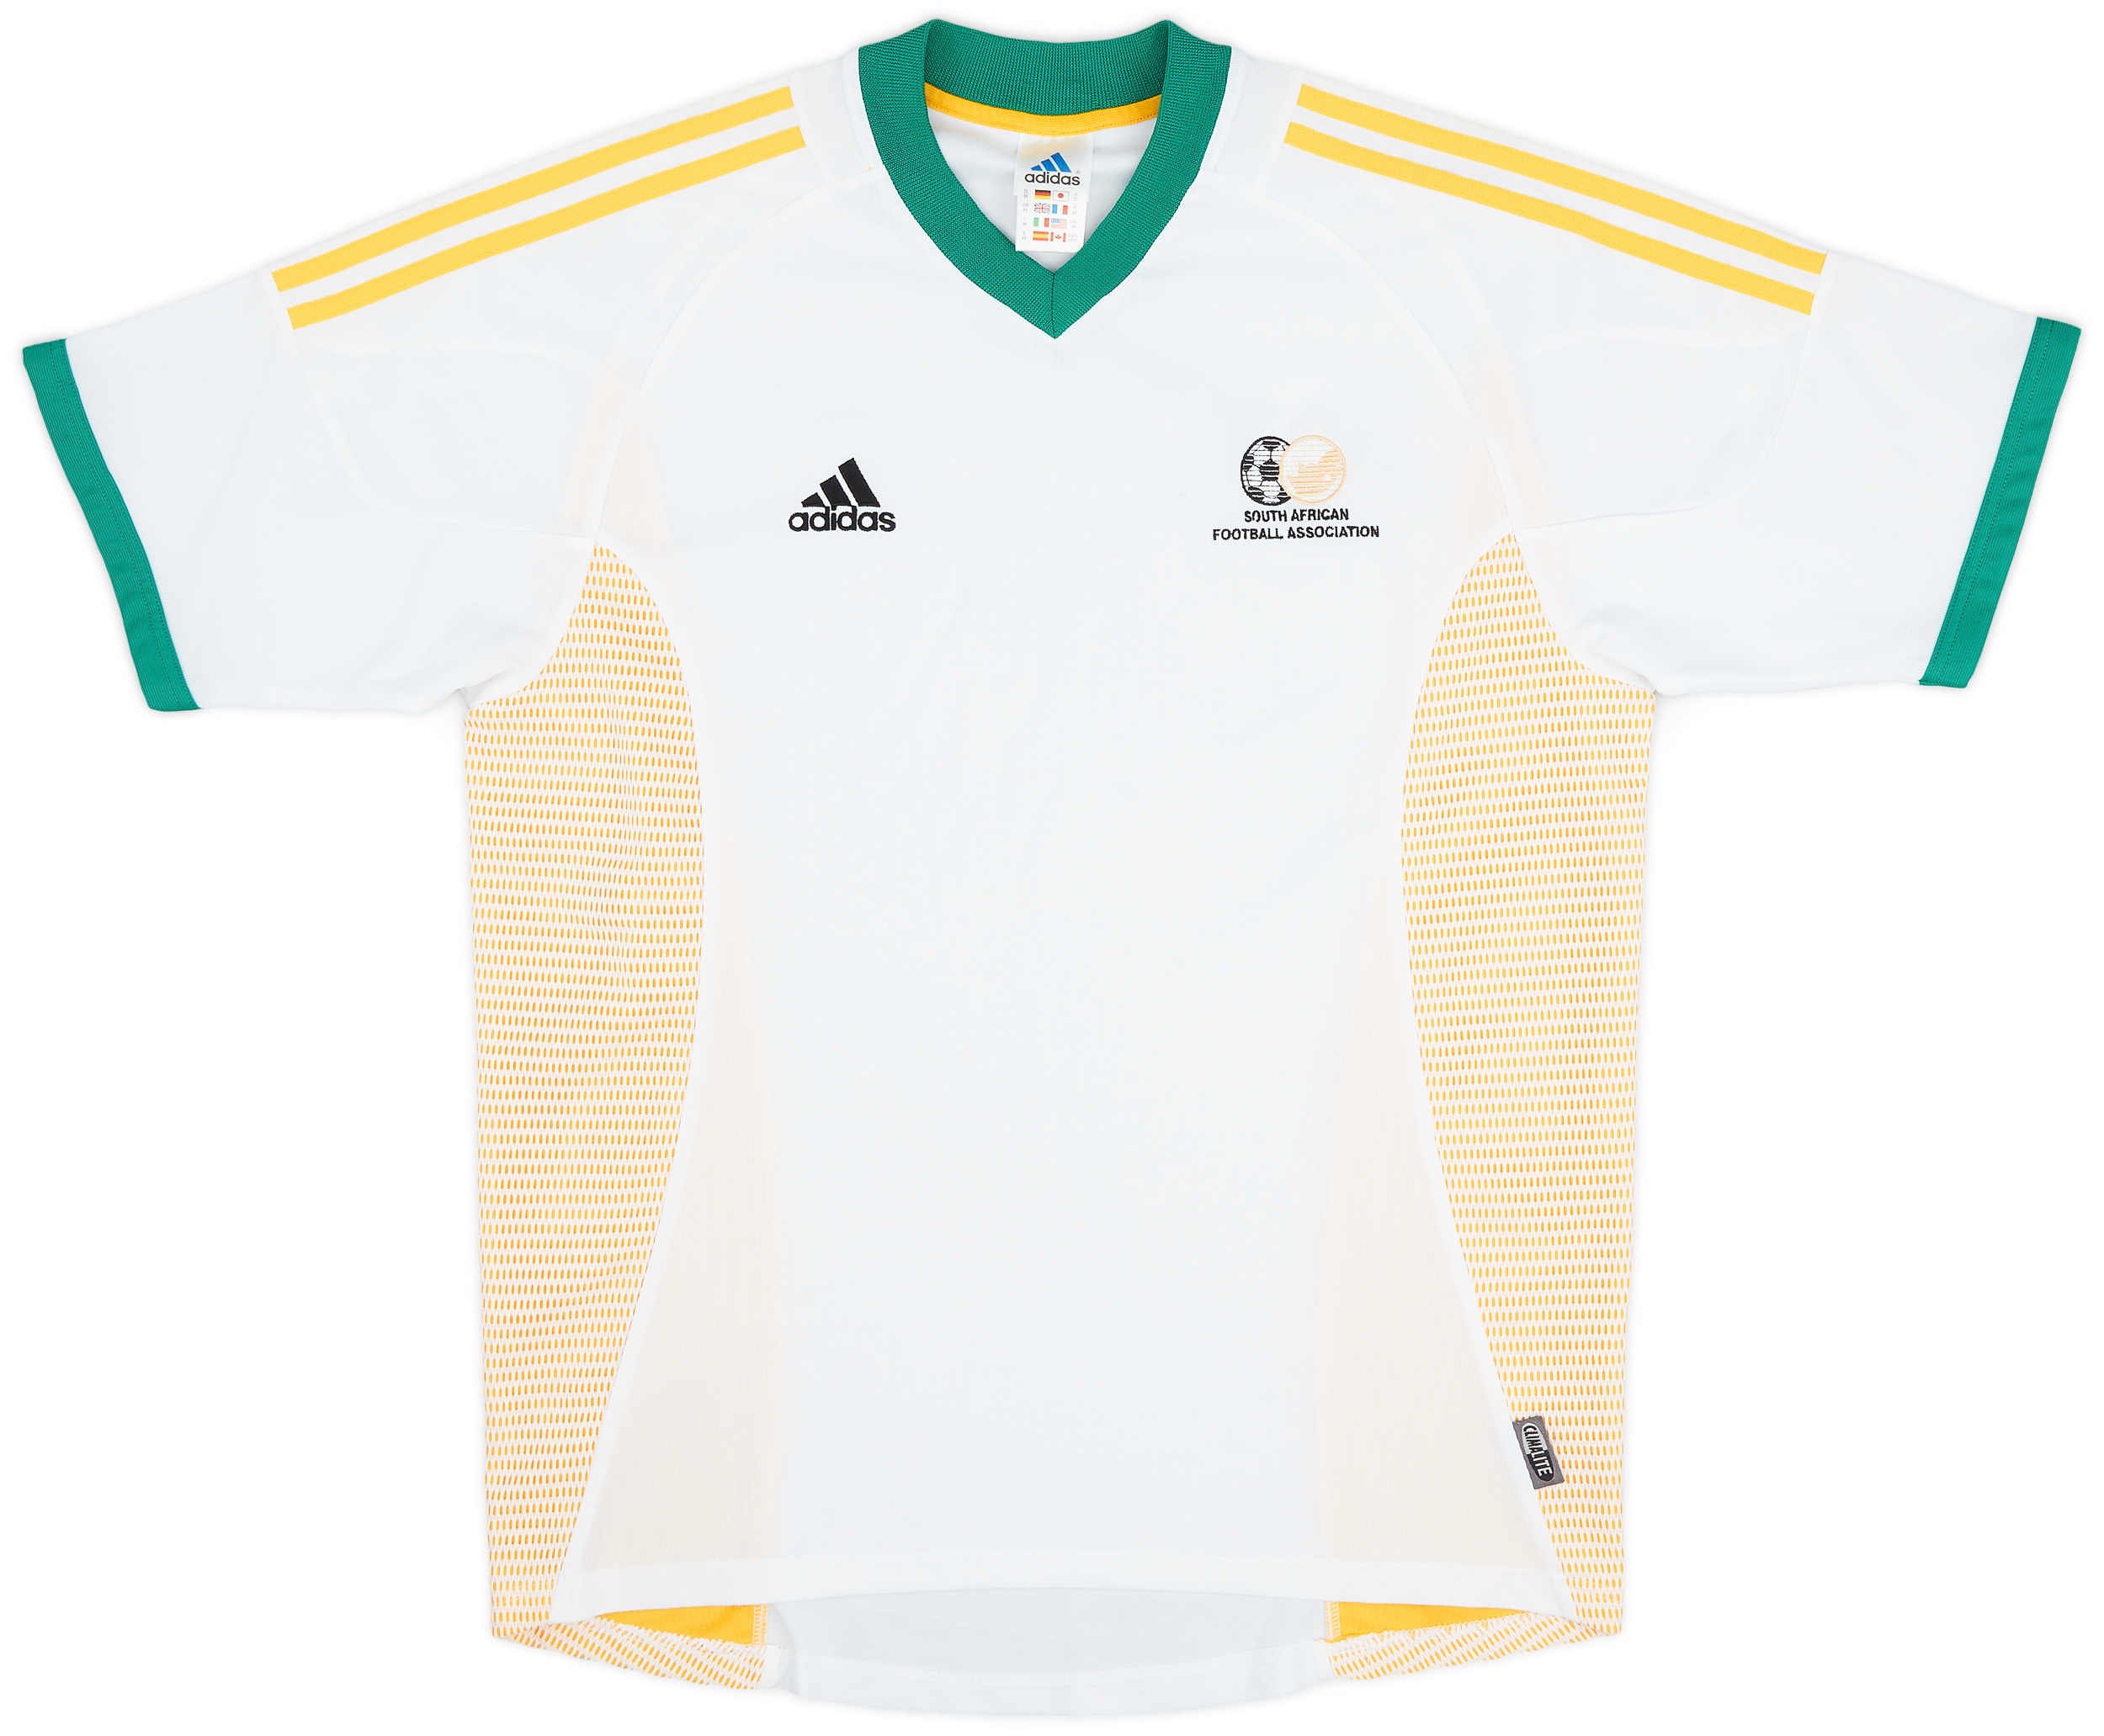 2002-04 South Africa Home Shirt - 9/10 - ()